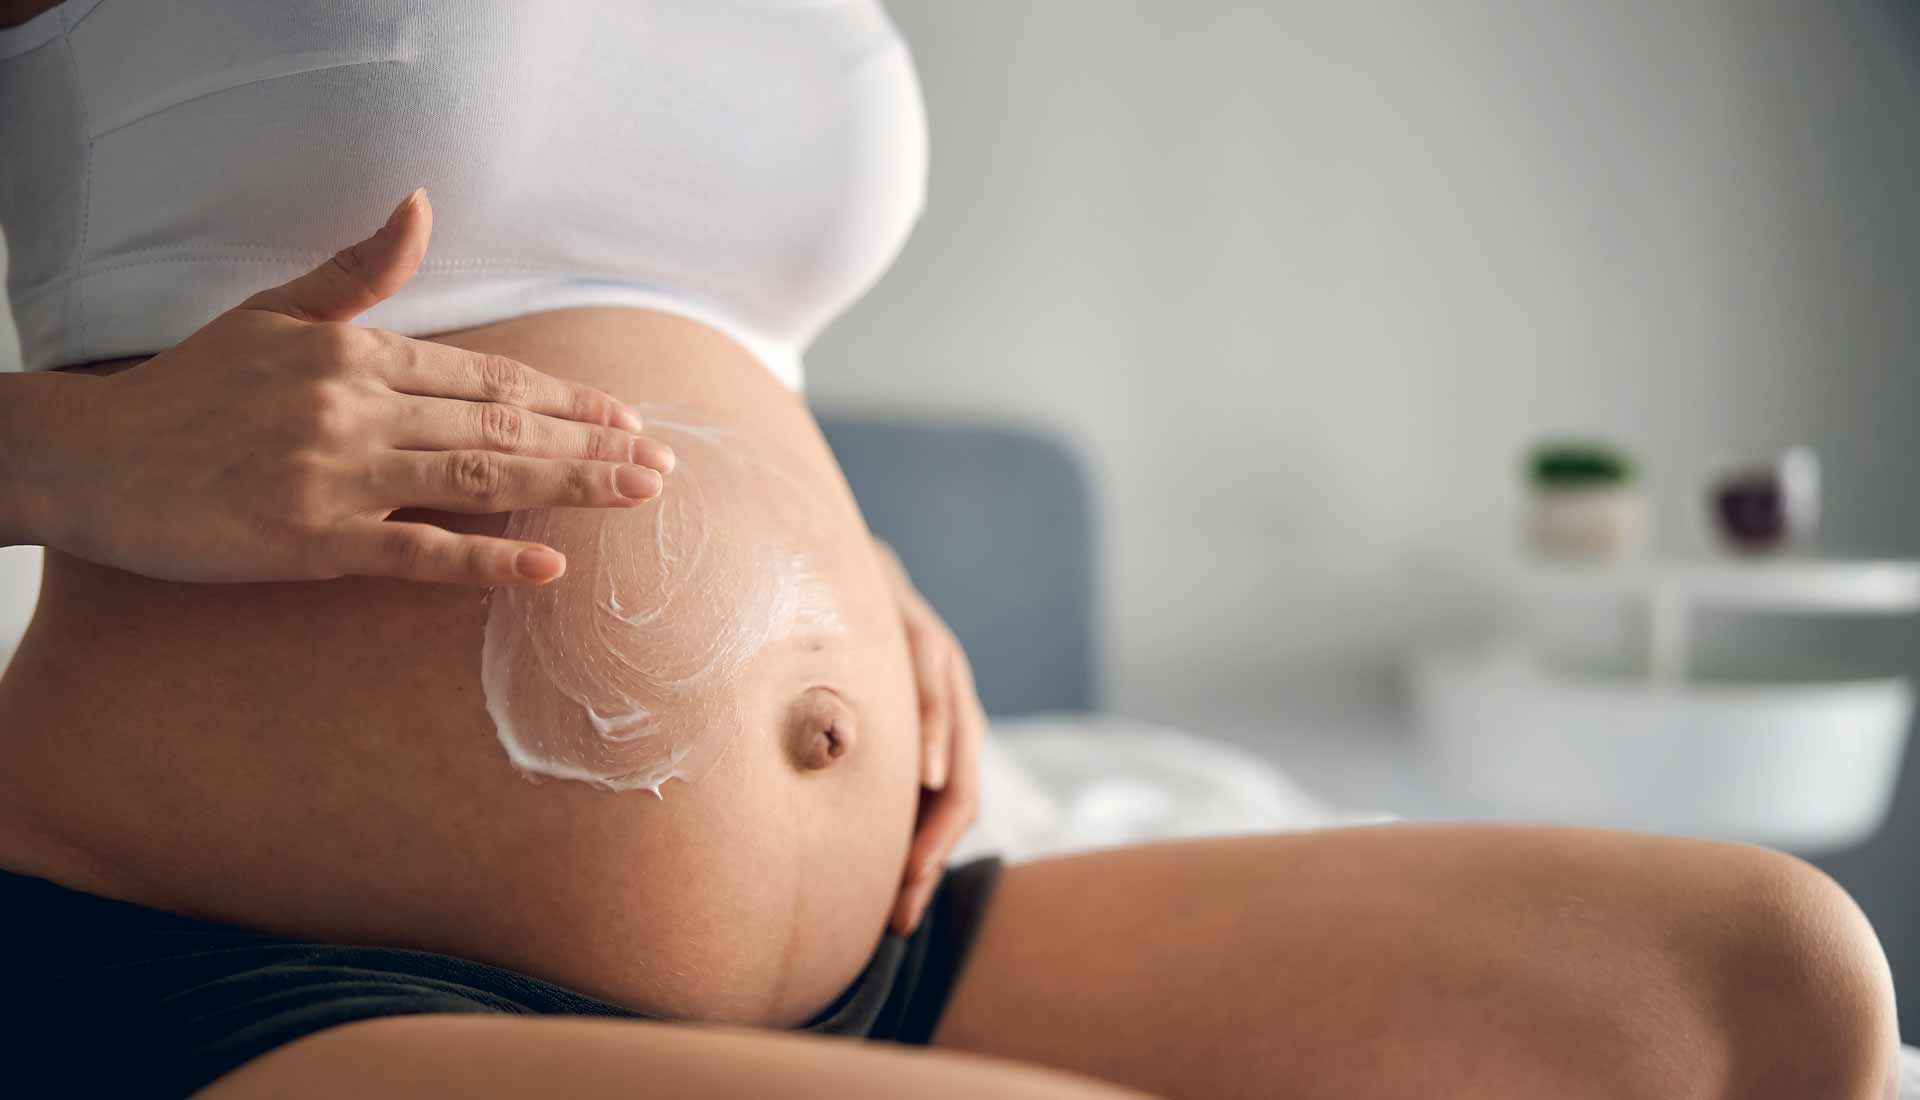 How can I treat stretch marks during pregnancy?